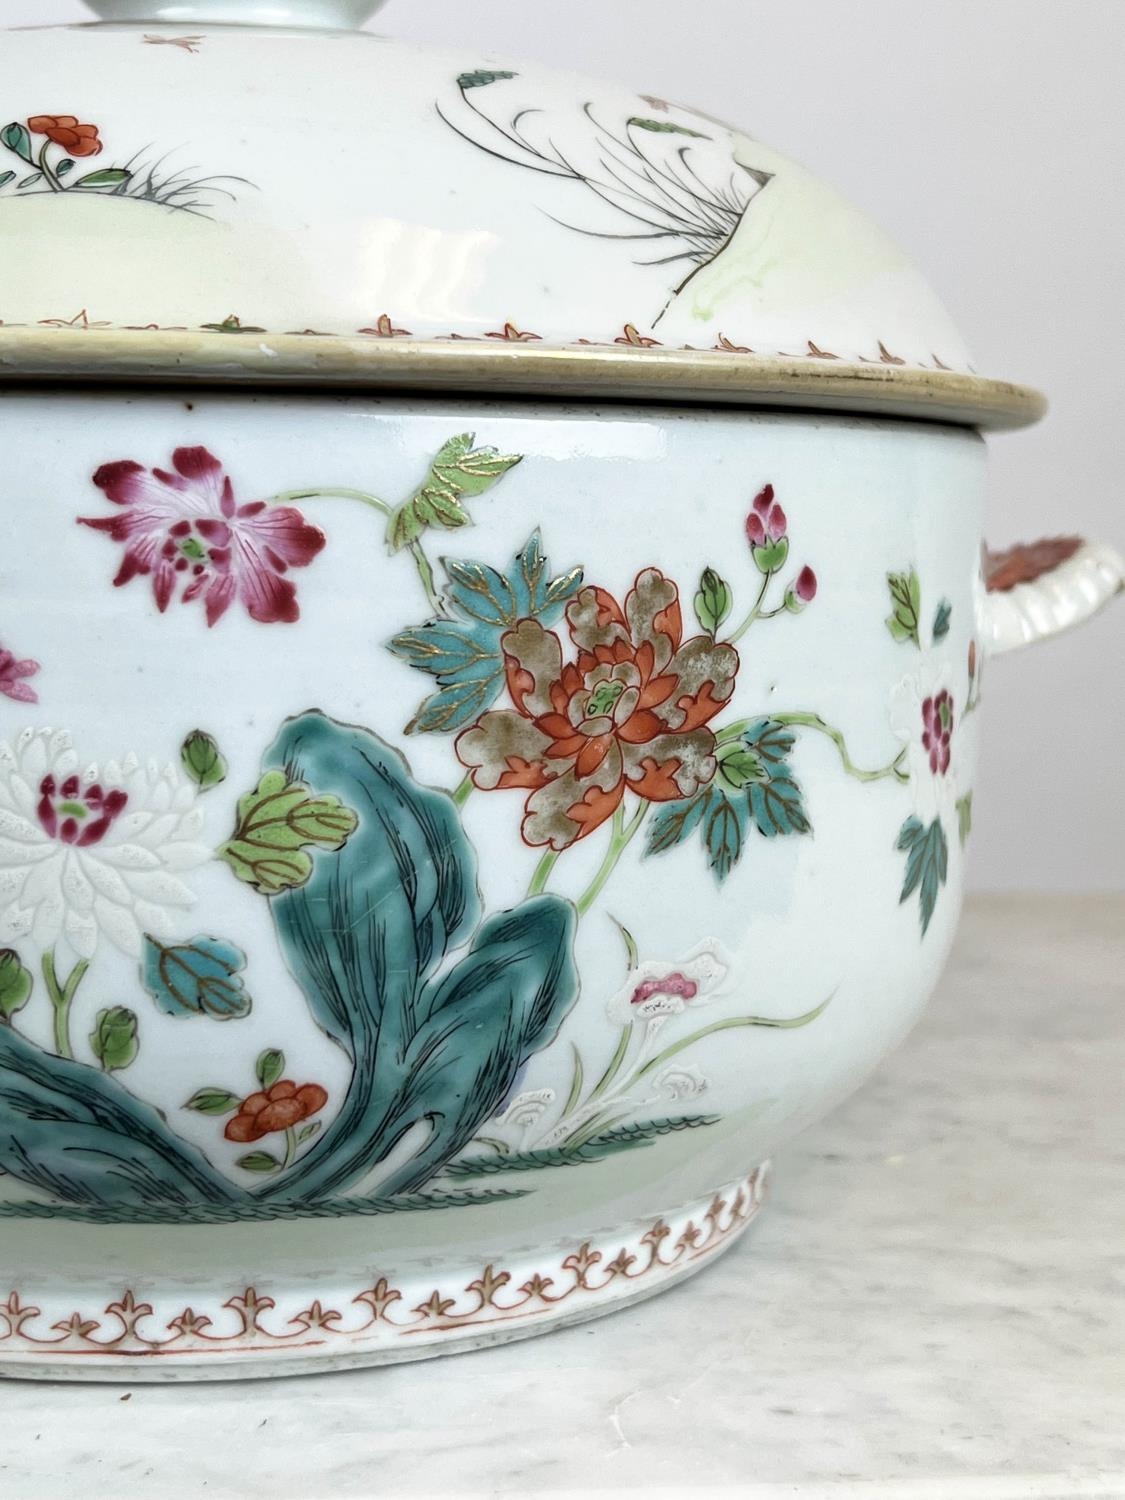 CHINESE EXPORT SOUP TUREEN, 19th century famille rose, decorated with cranes in garden scenes. - Image 3 of 9